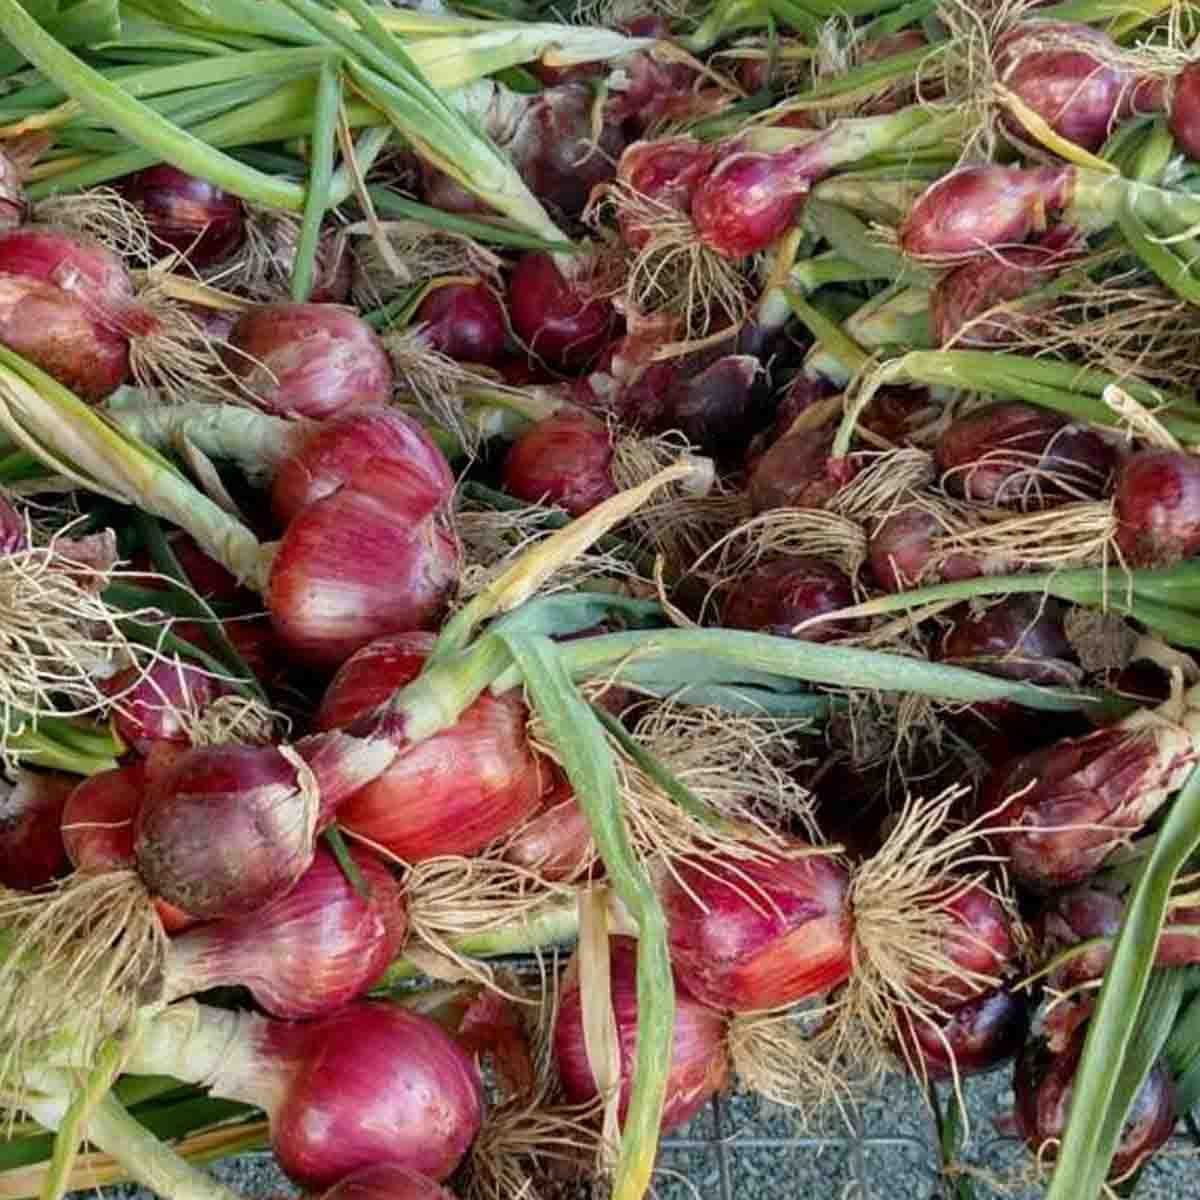 A huge bin of harvested onions